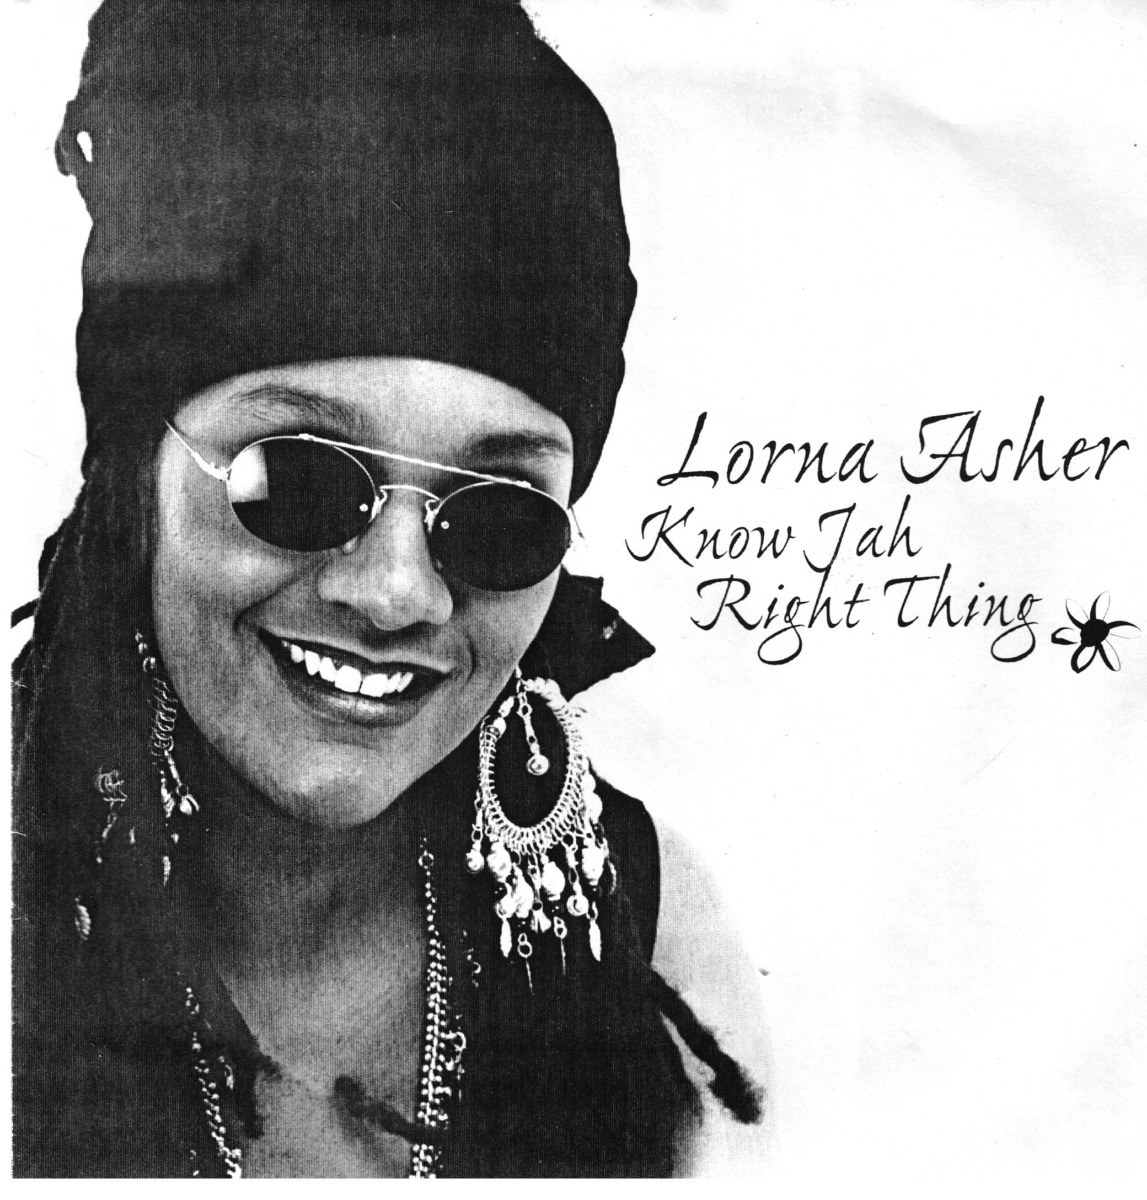 Lorna Asher - Know Jah / Right Now (7")